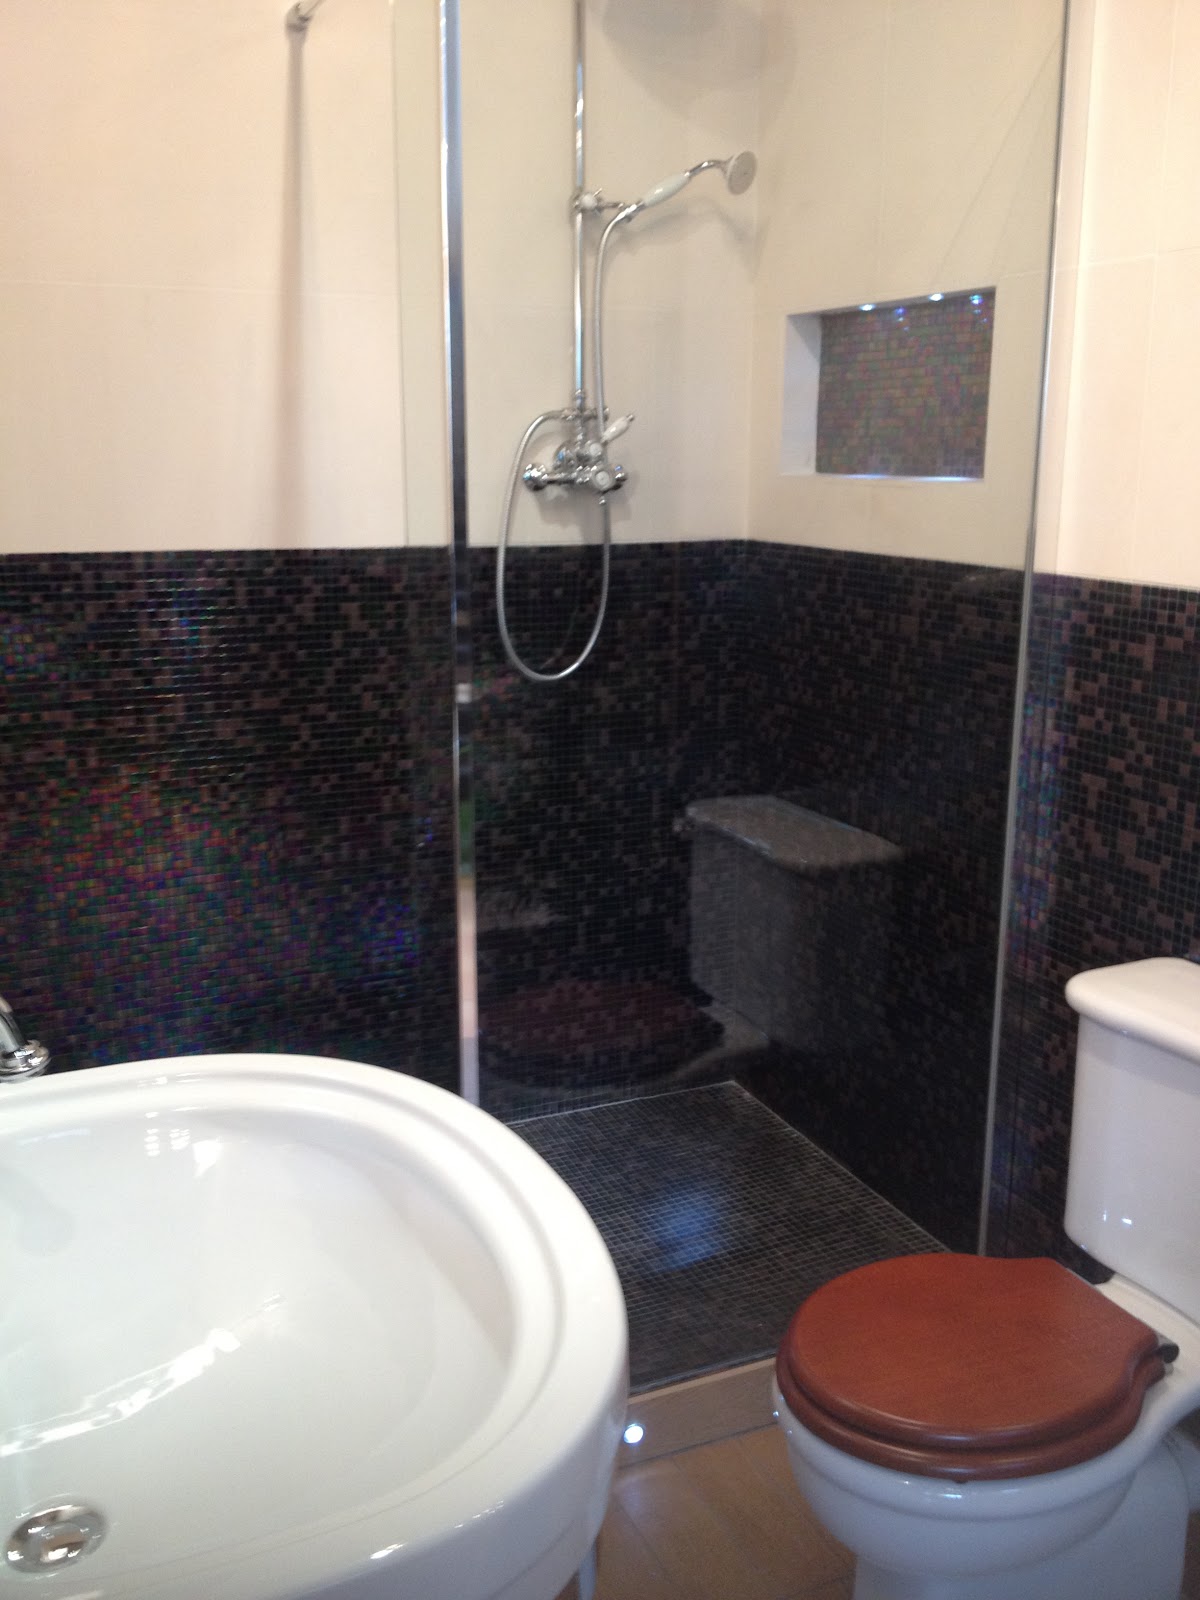 traditional bathroom accessories Wood effect flooring, mosaic shower area and built in shelf